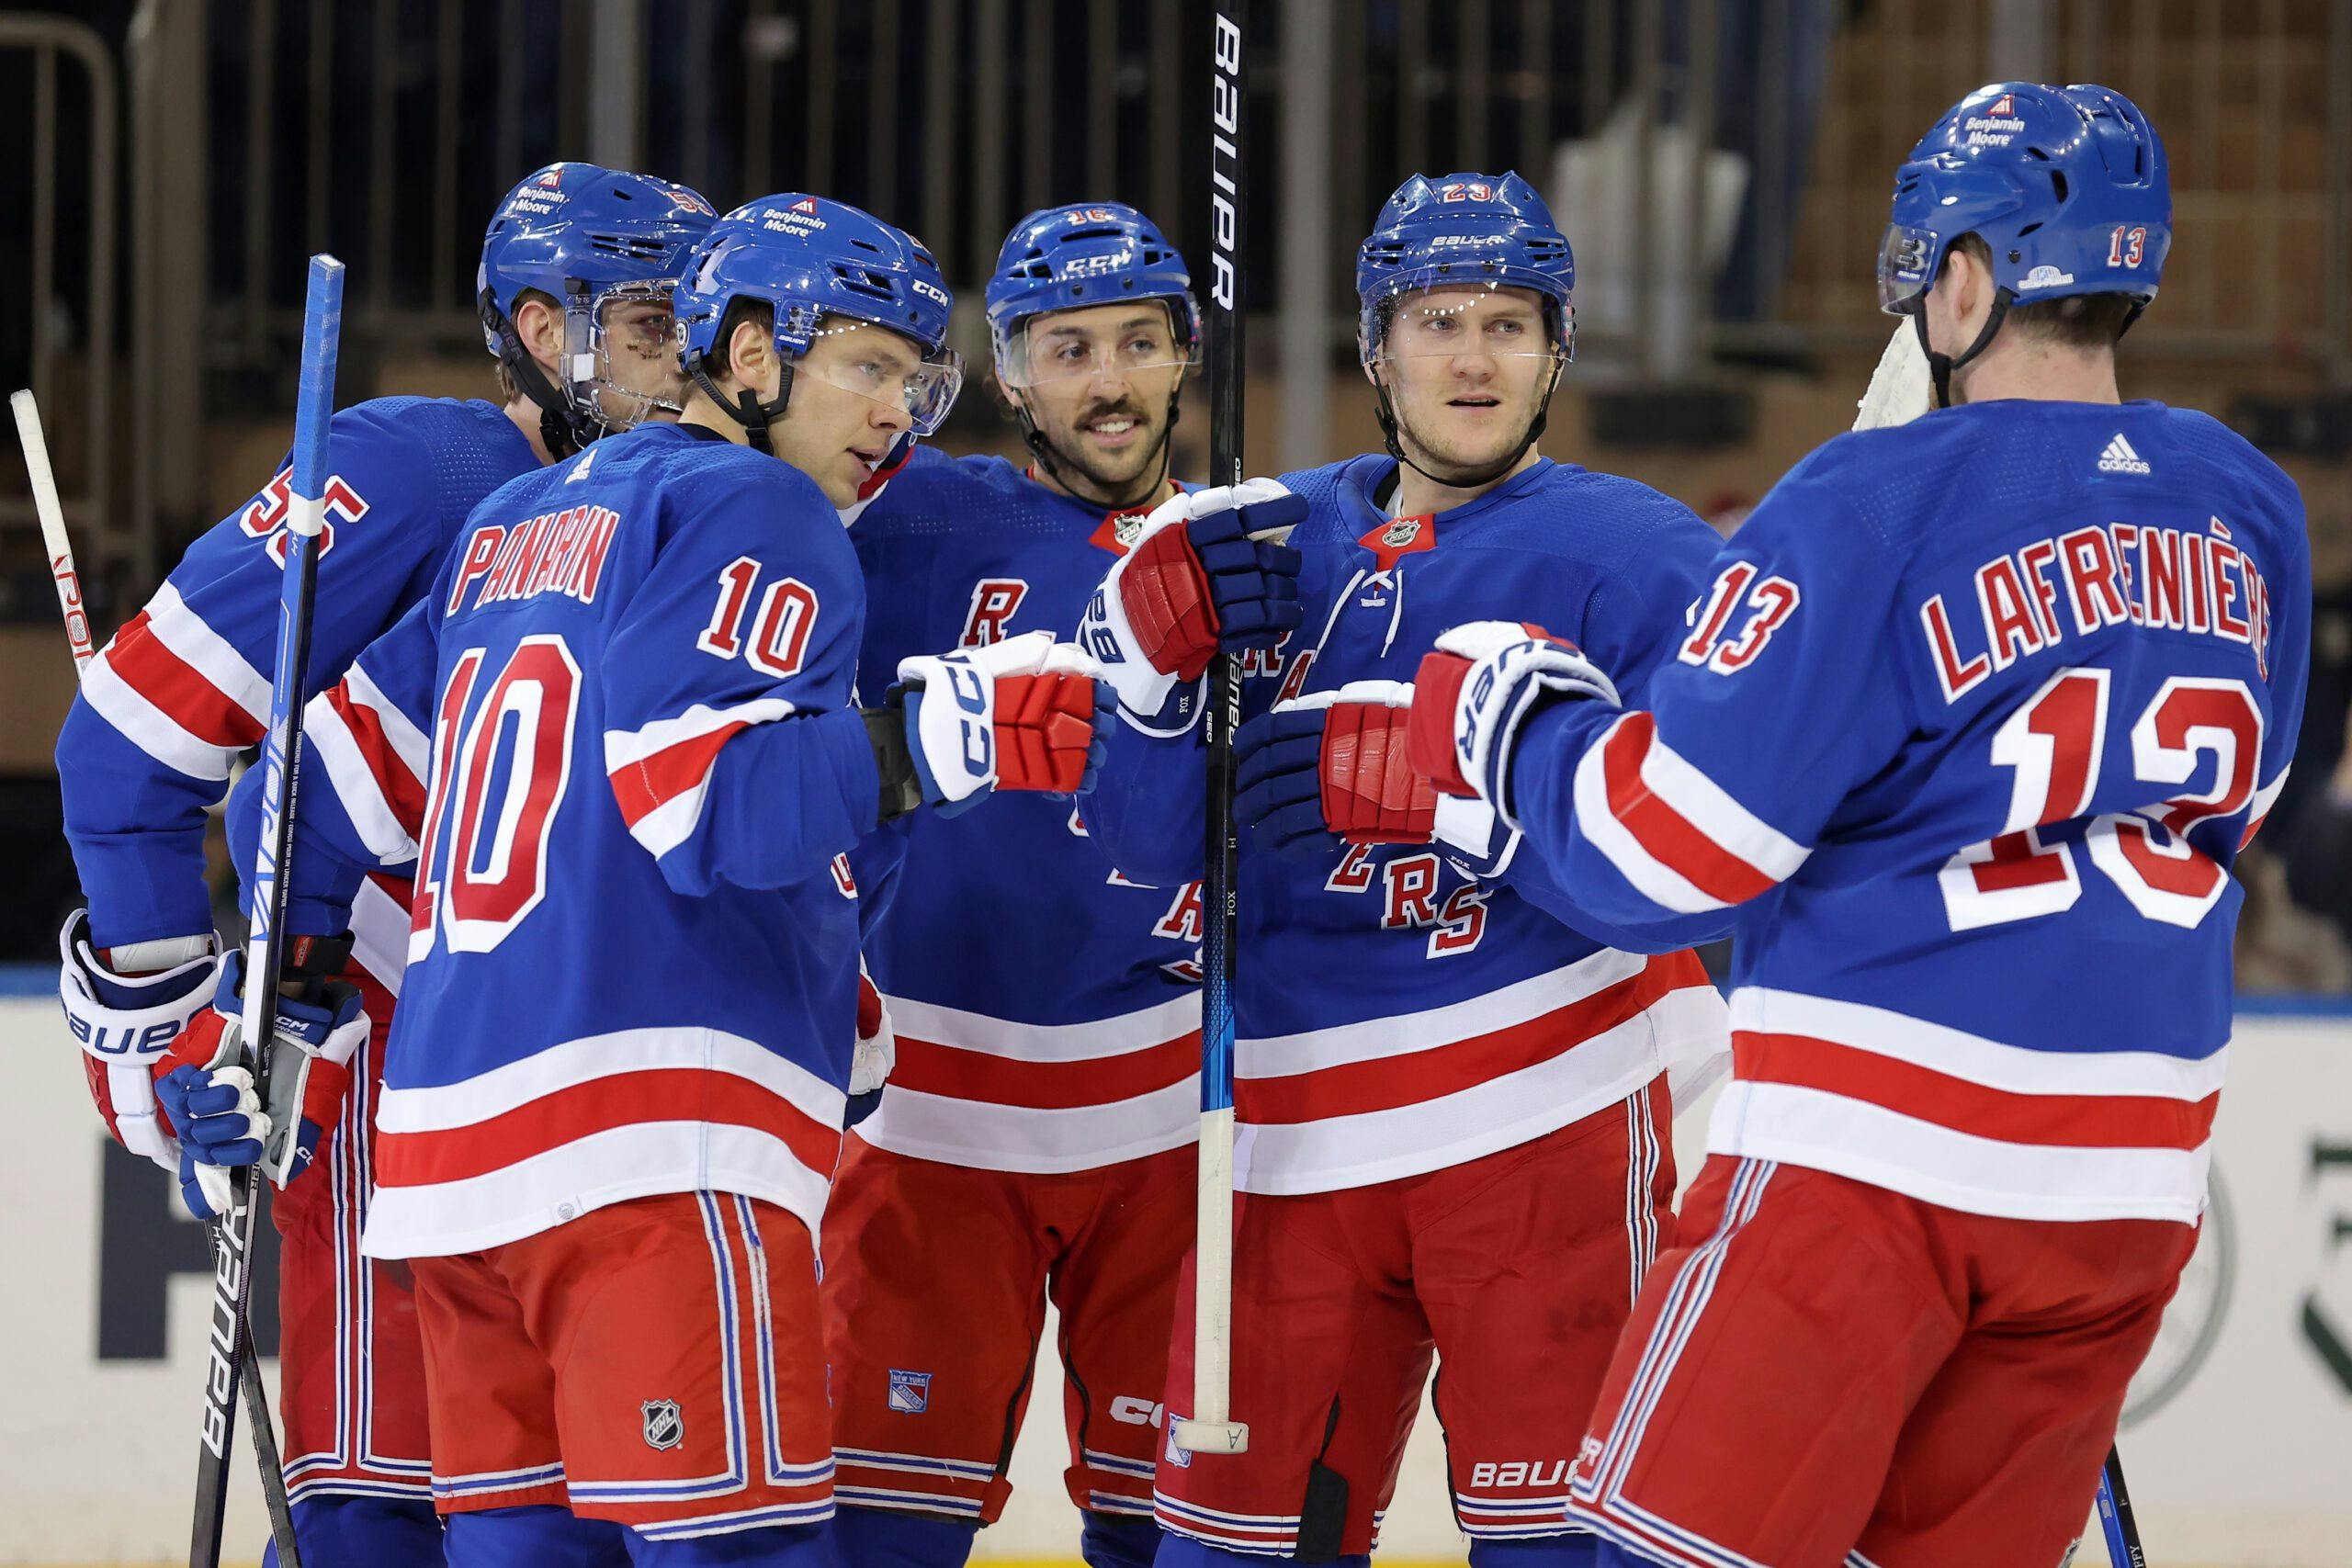 ‘You can’t take your foot off the gas’: New York Rangers hoping to crush franchise-record win streak